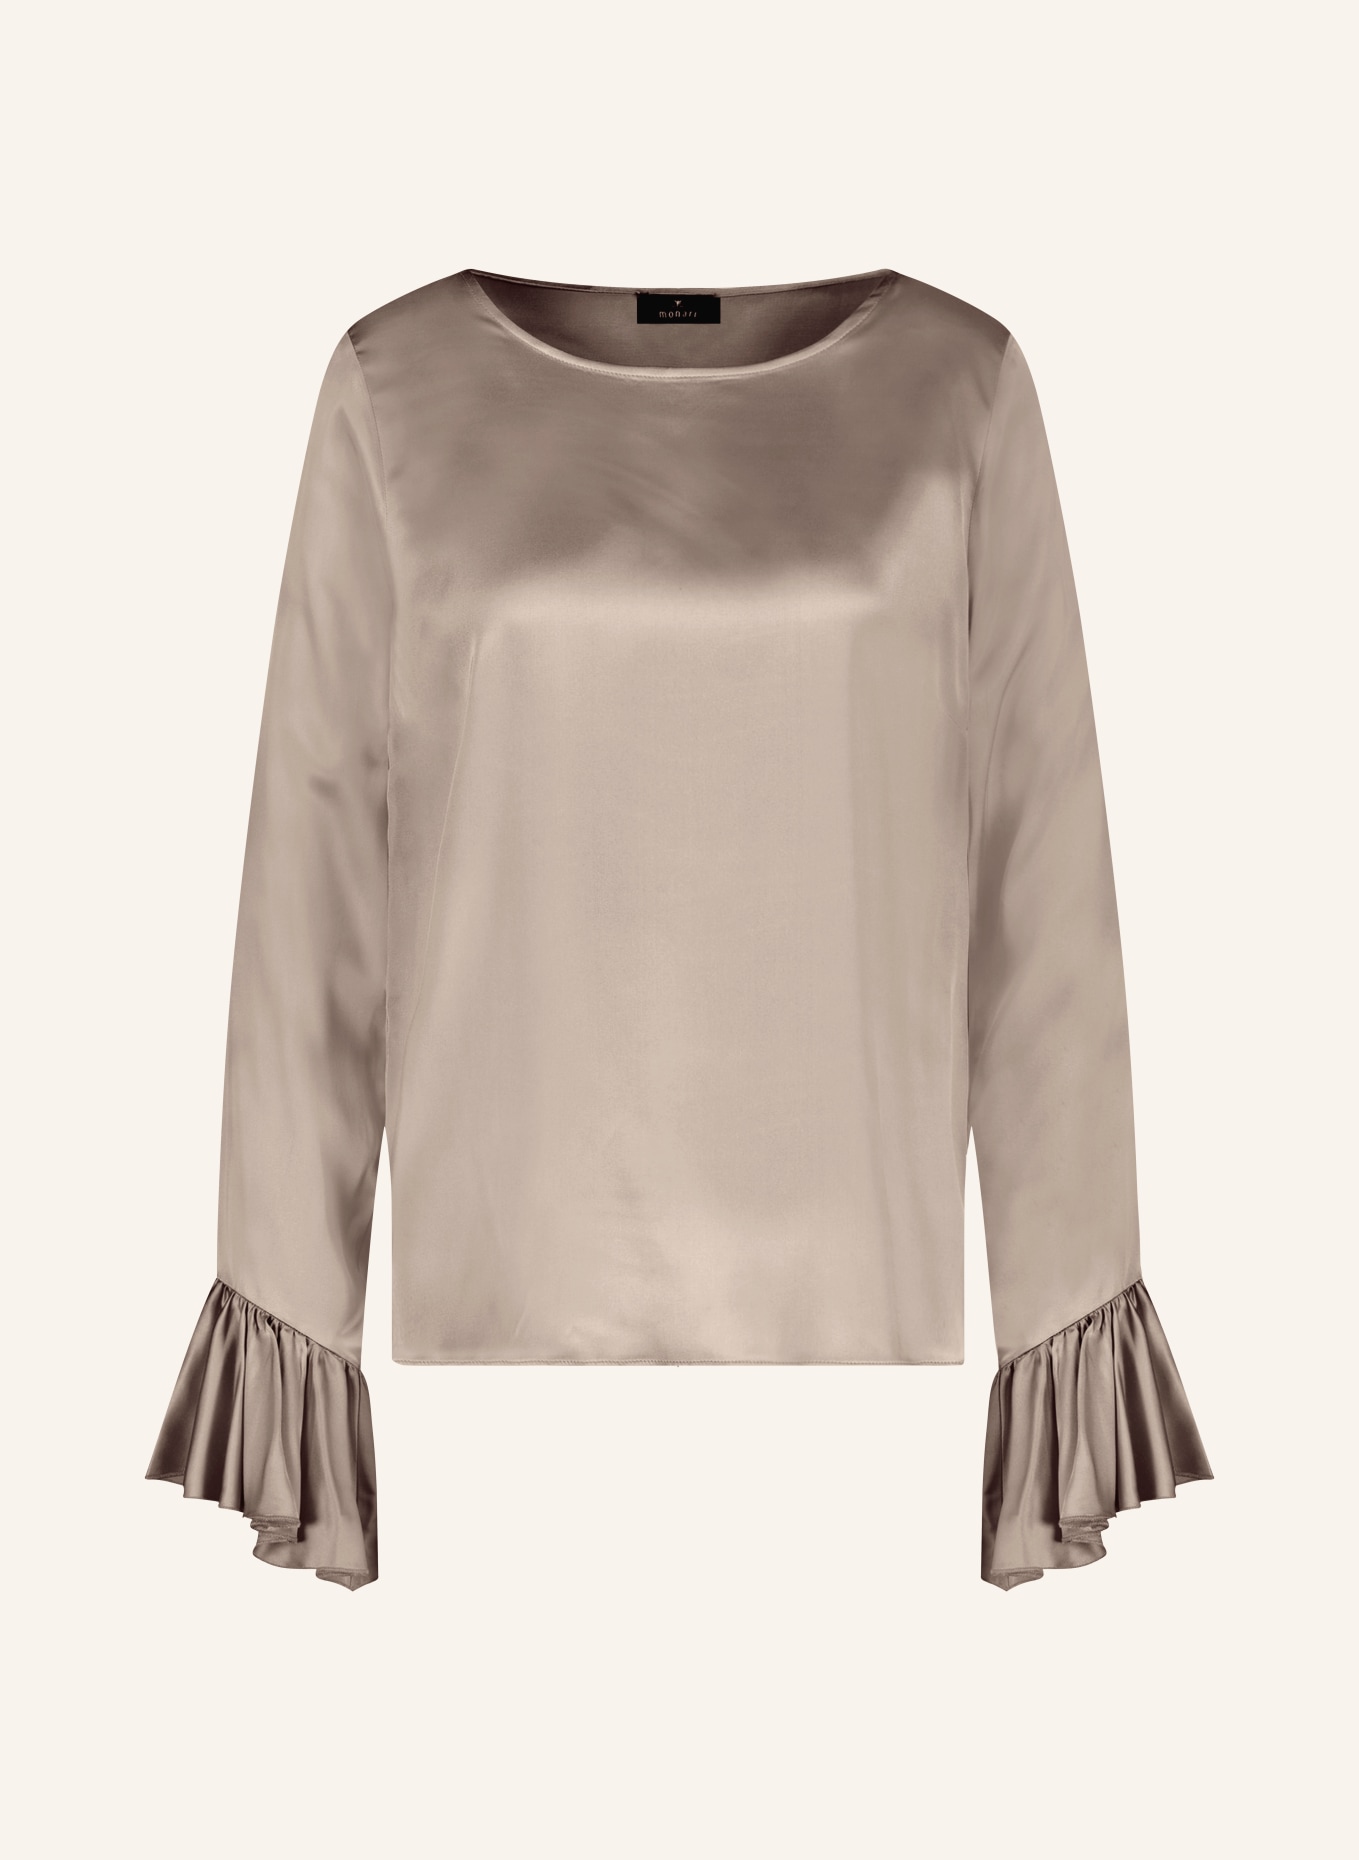 monari Shirt in in satin taupe blouse with frills